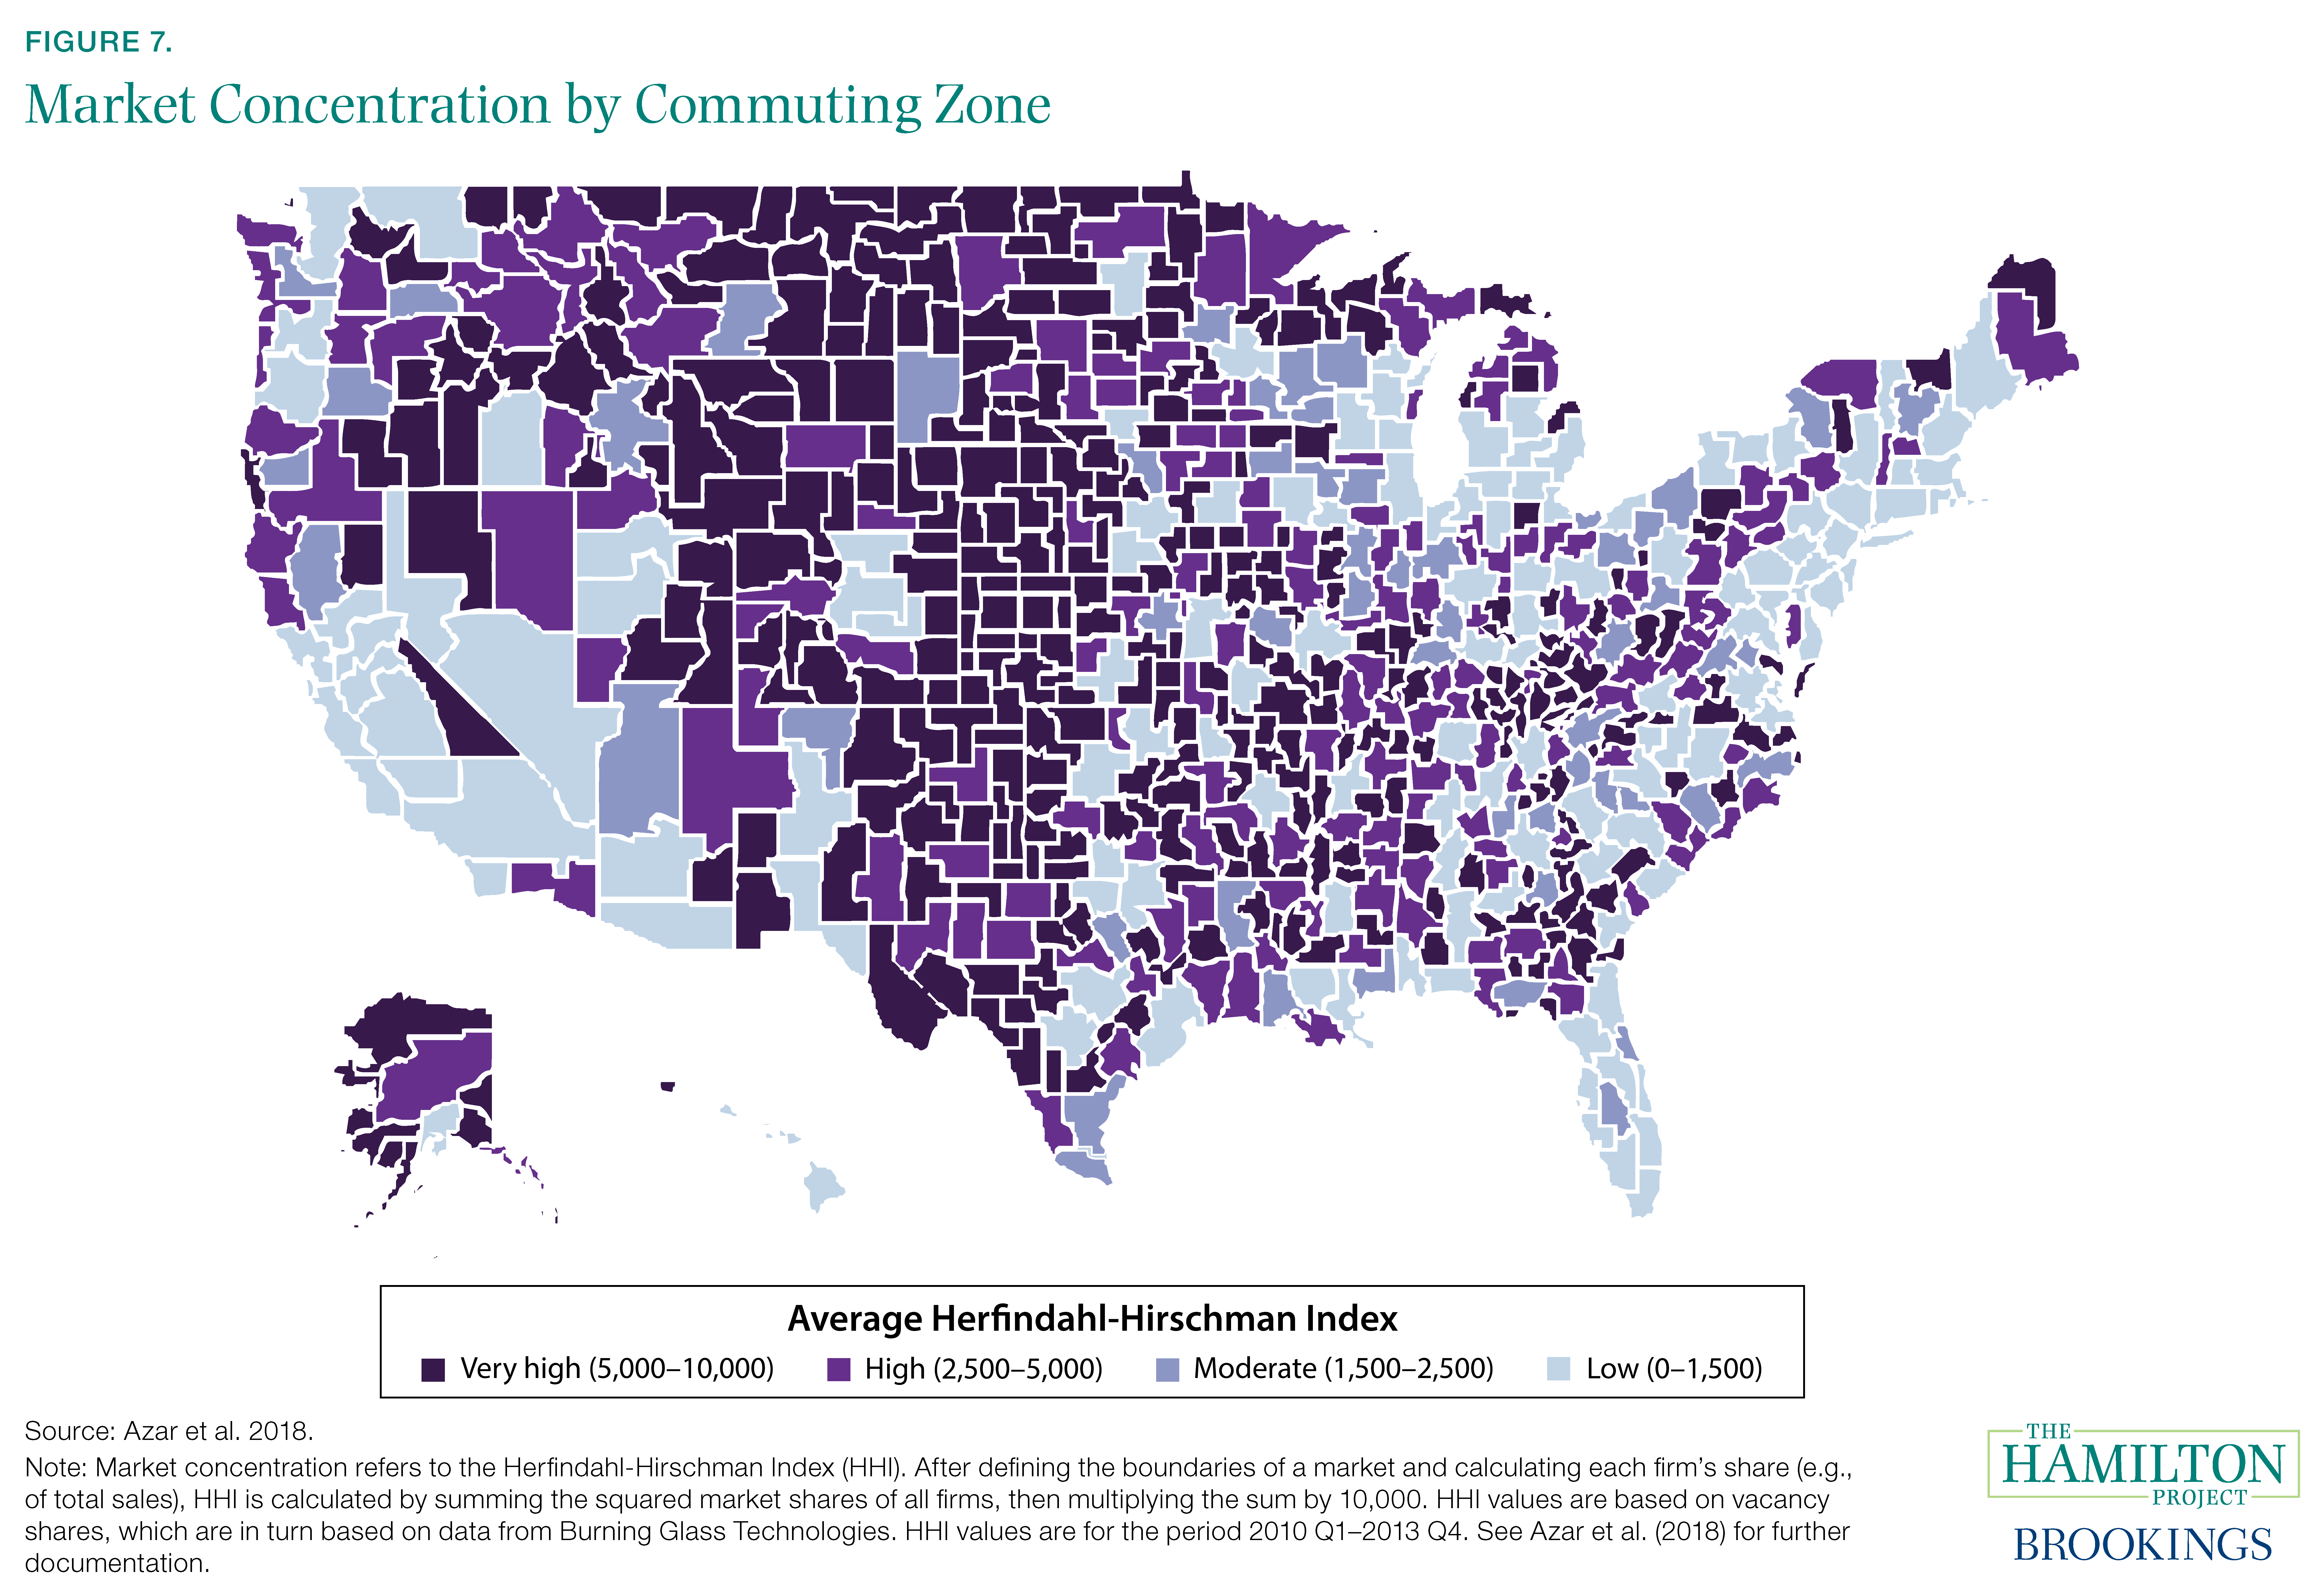 Figure 7. Market Concentration by Commuting Zone